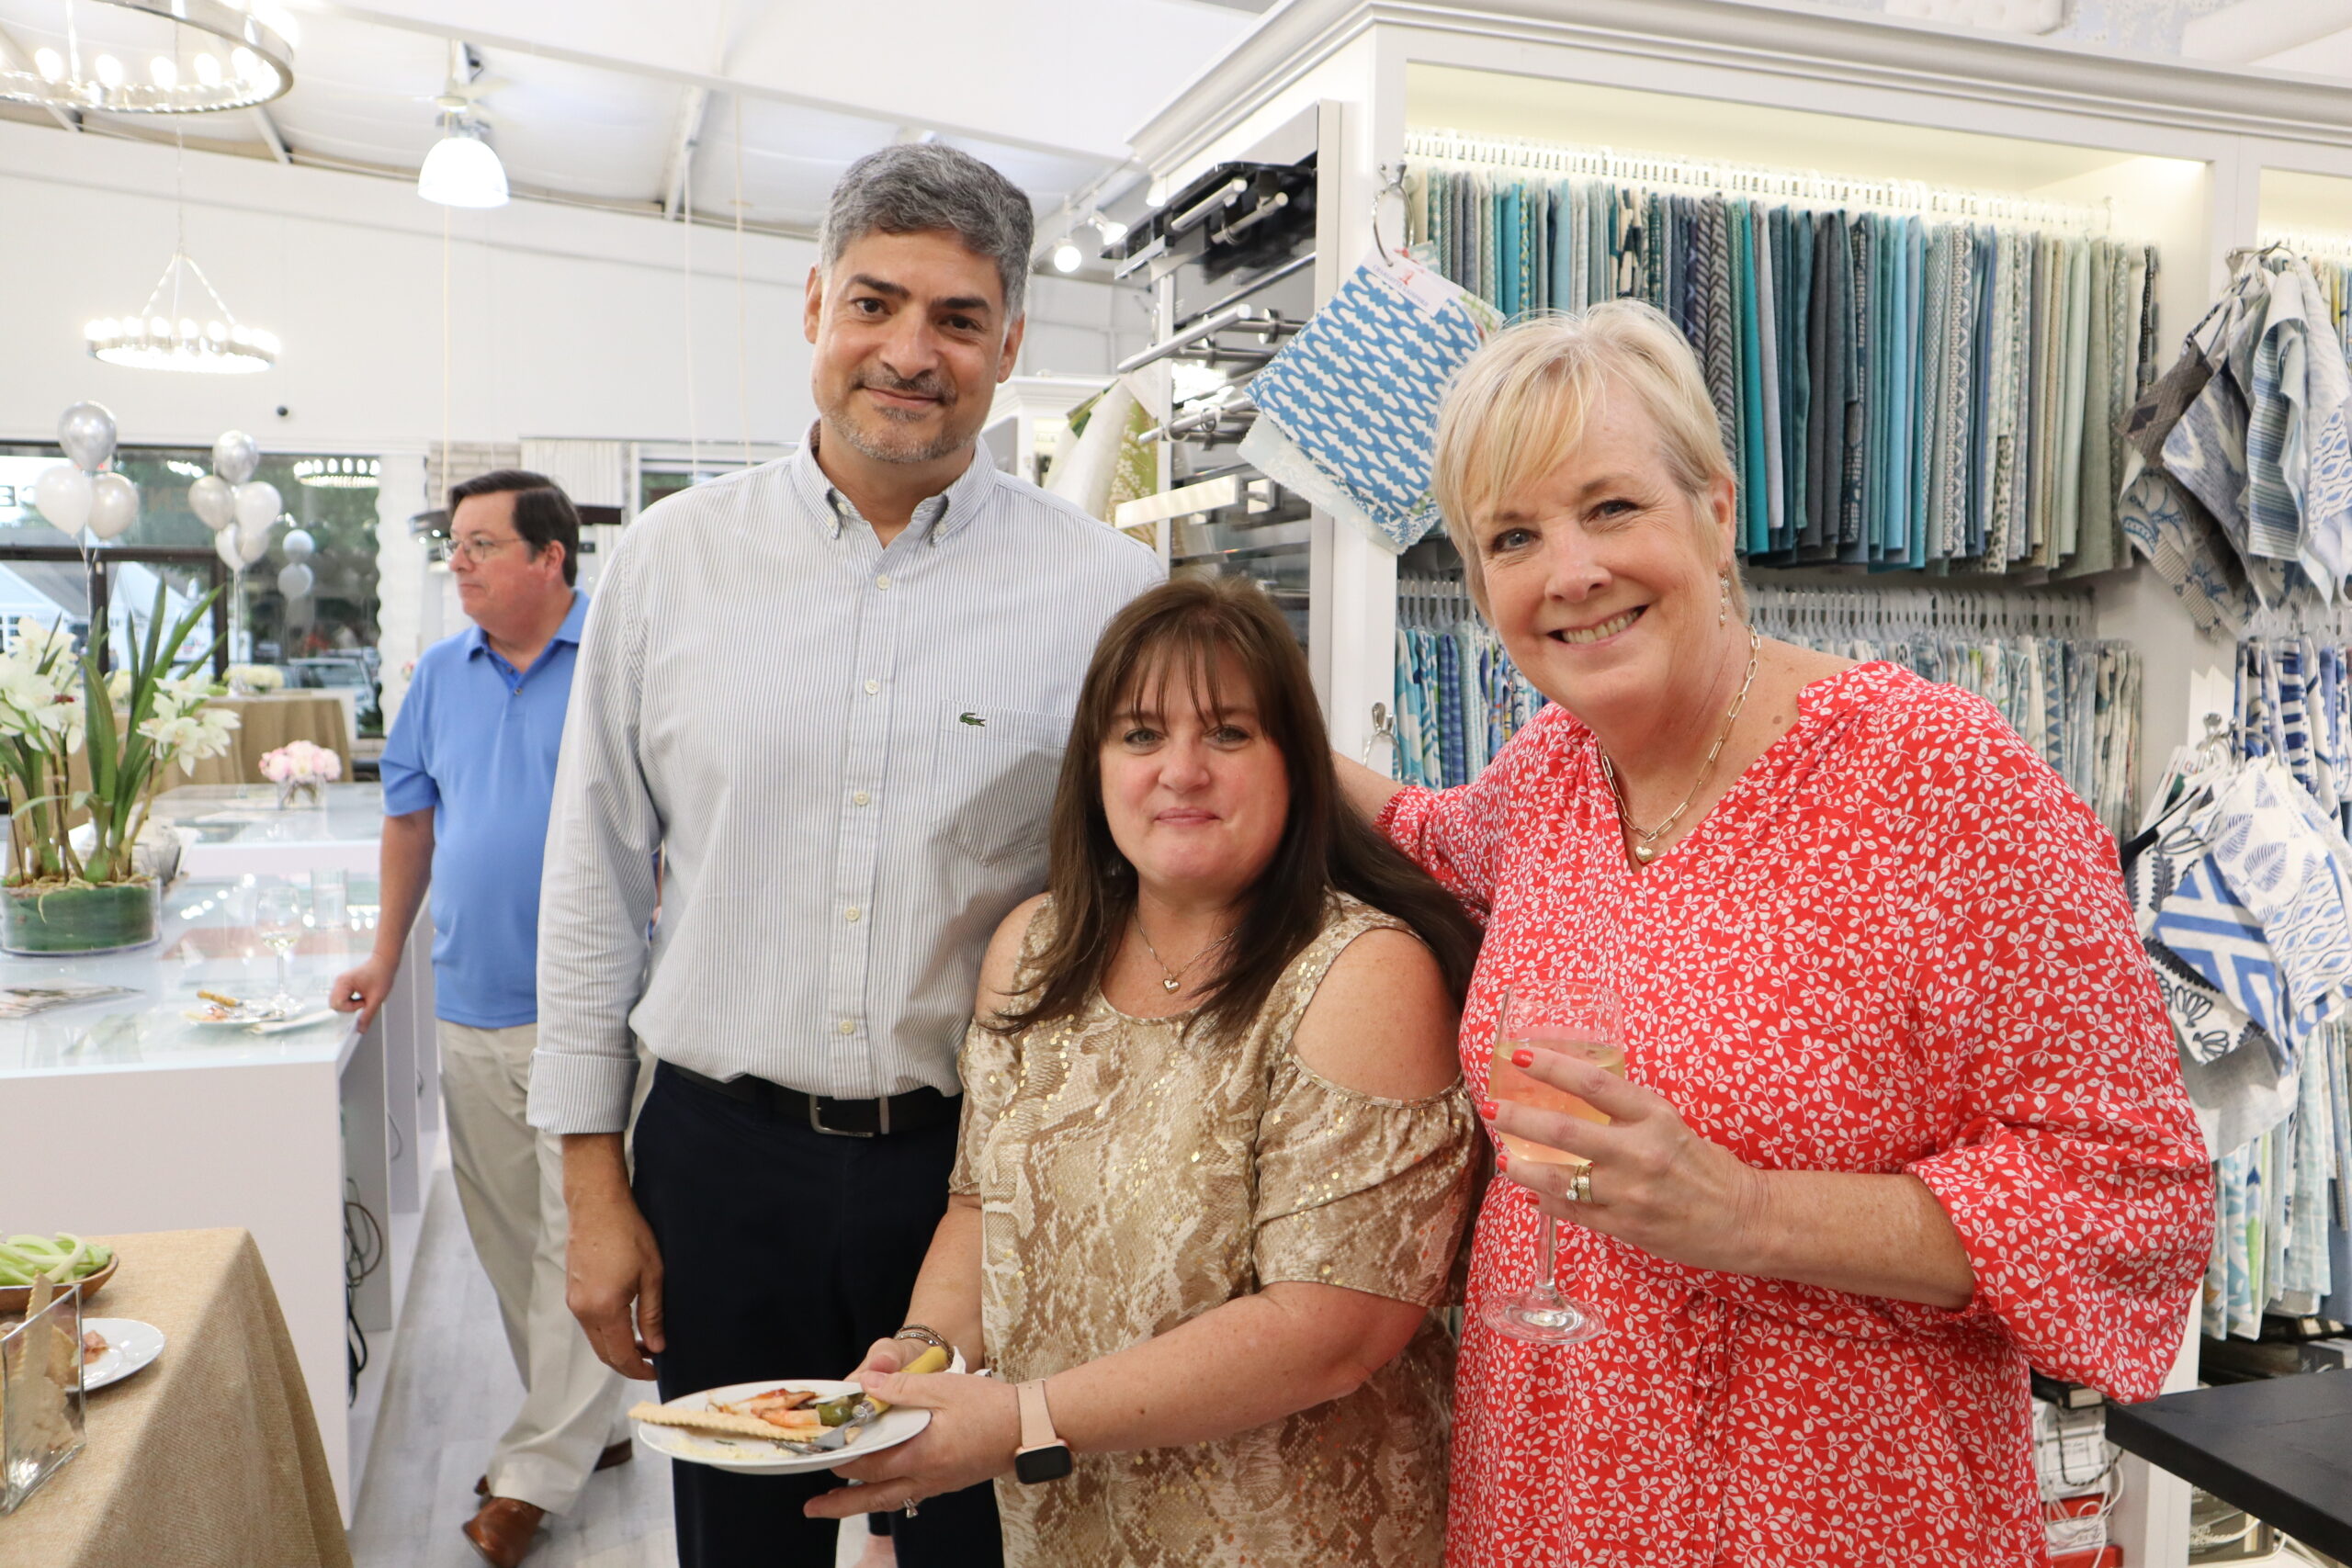 From left, Victor Pariz, a sales associate at The Carpetman, Corrine Kolb, the accounts receivable administrator at The Carpetman, and Ann Marie Pomposello, the administrative scheduler at The Carpetman, enjoy hors d’oeuvres and wine at the grand opening.  MEGAN NAFTALI